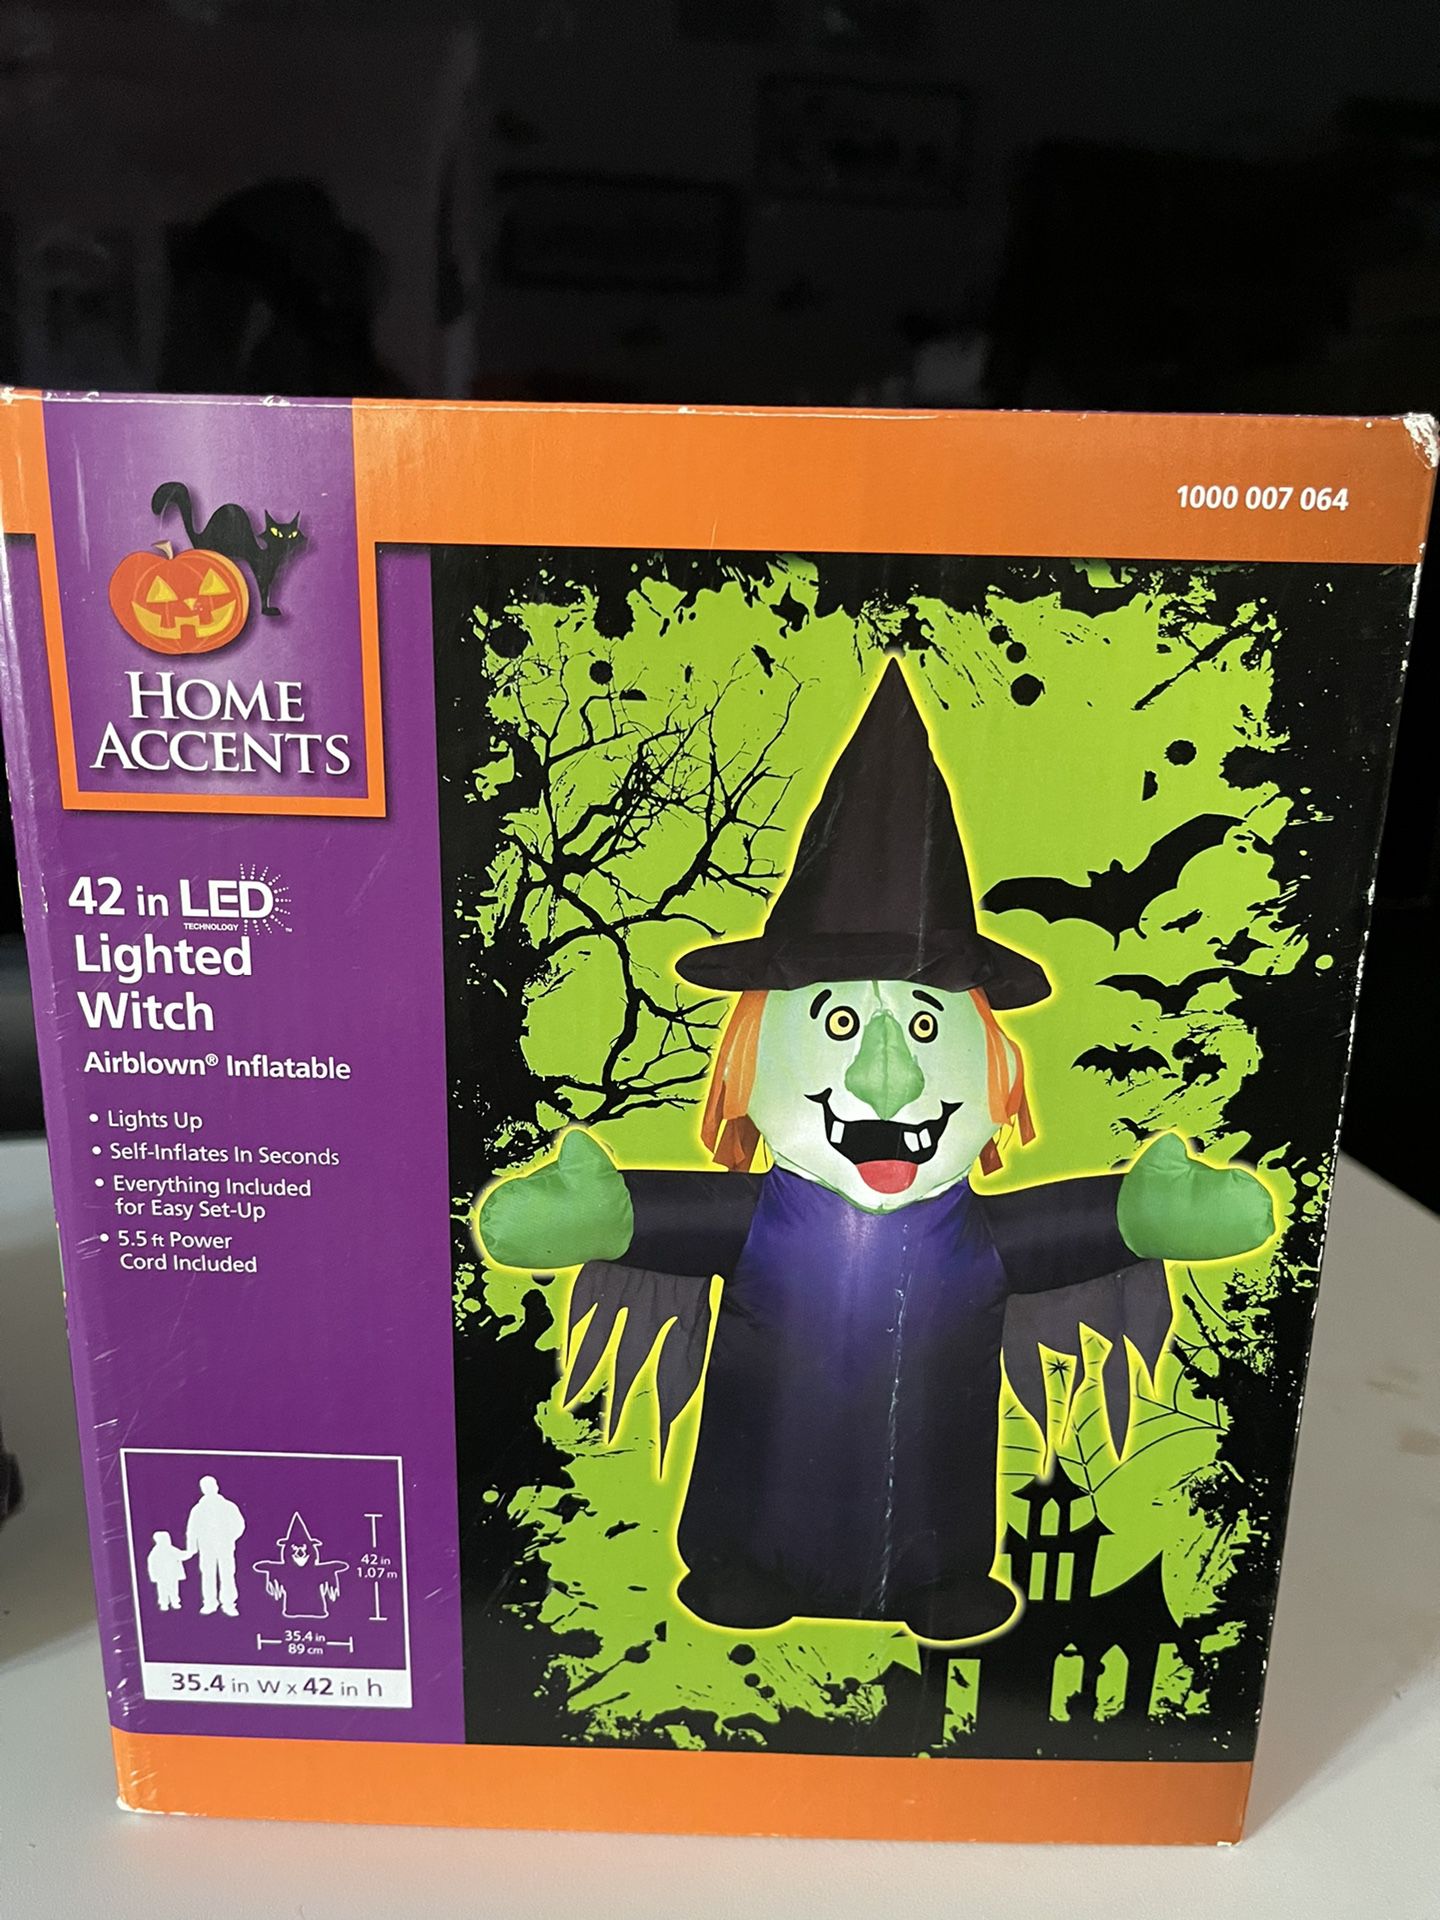 New 42” LED Lighted Witch 🧙‍♀️ Airblown Inflatable Light Up 